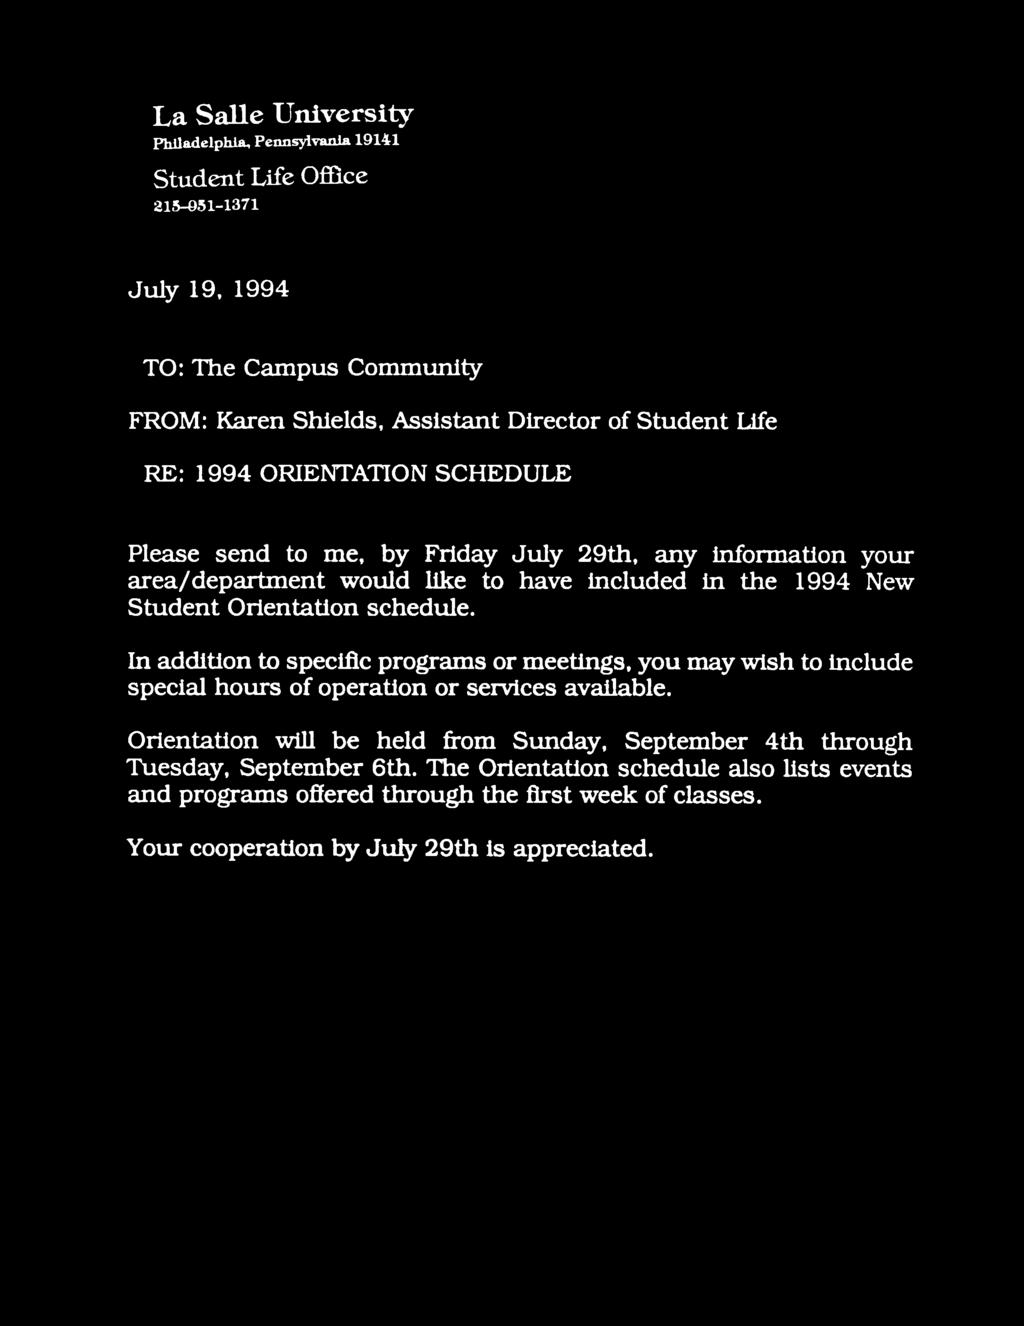 Philadelphia, Pennsylvania 19141 S tudent Life Office 215-951-1371 July 19, 1994 TO: The Campus Community FROM: Karen Shields, Assistant Director of Student Life RE: 1994 ORIENTATION SCHEDULE Please